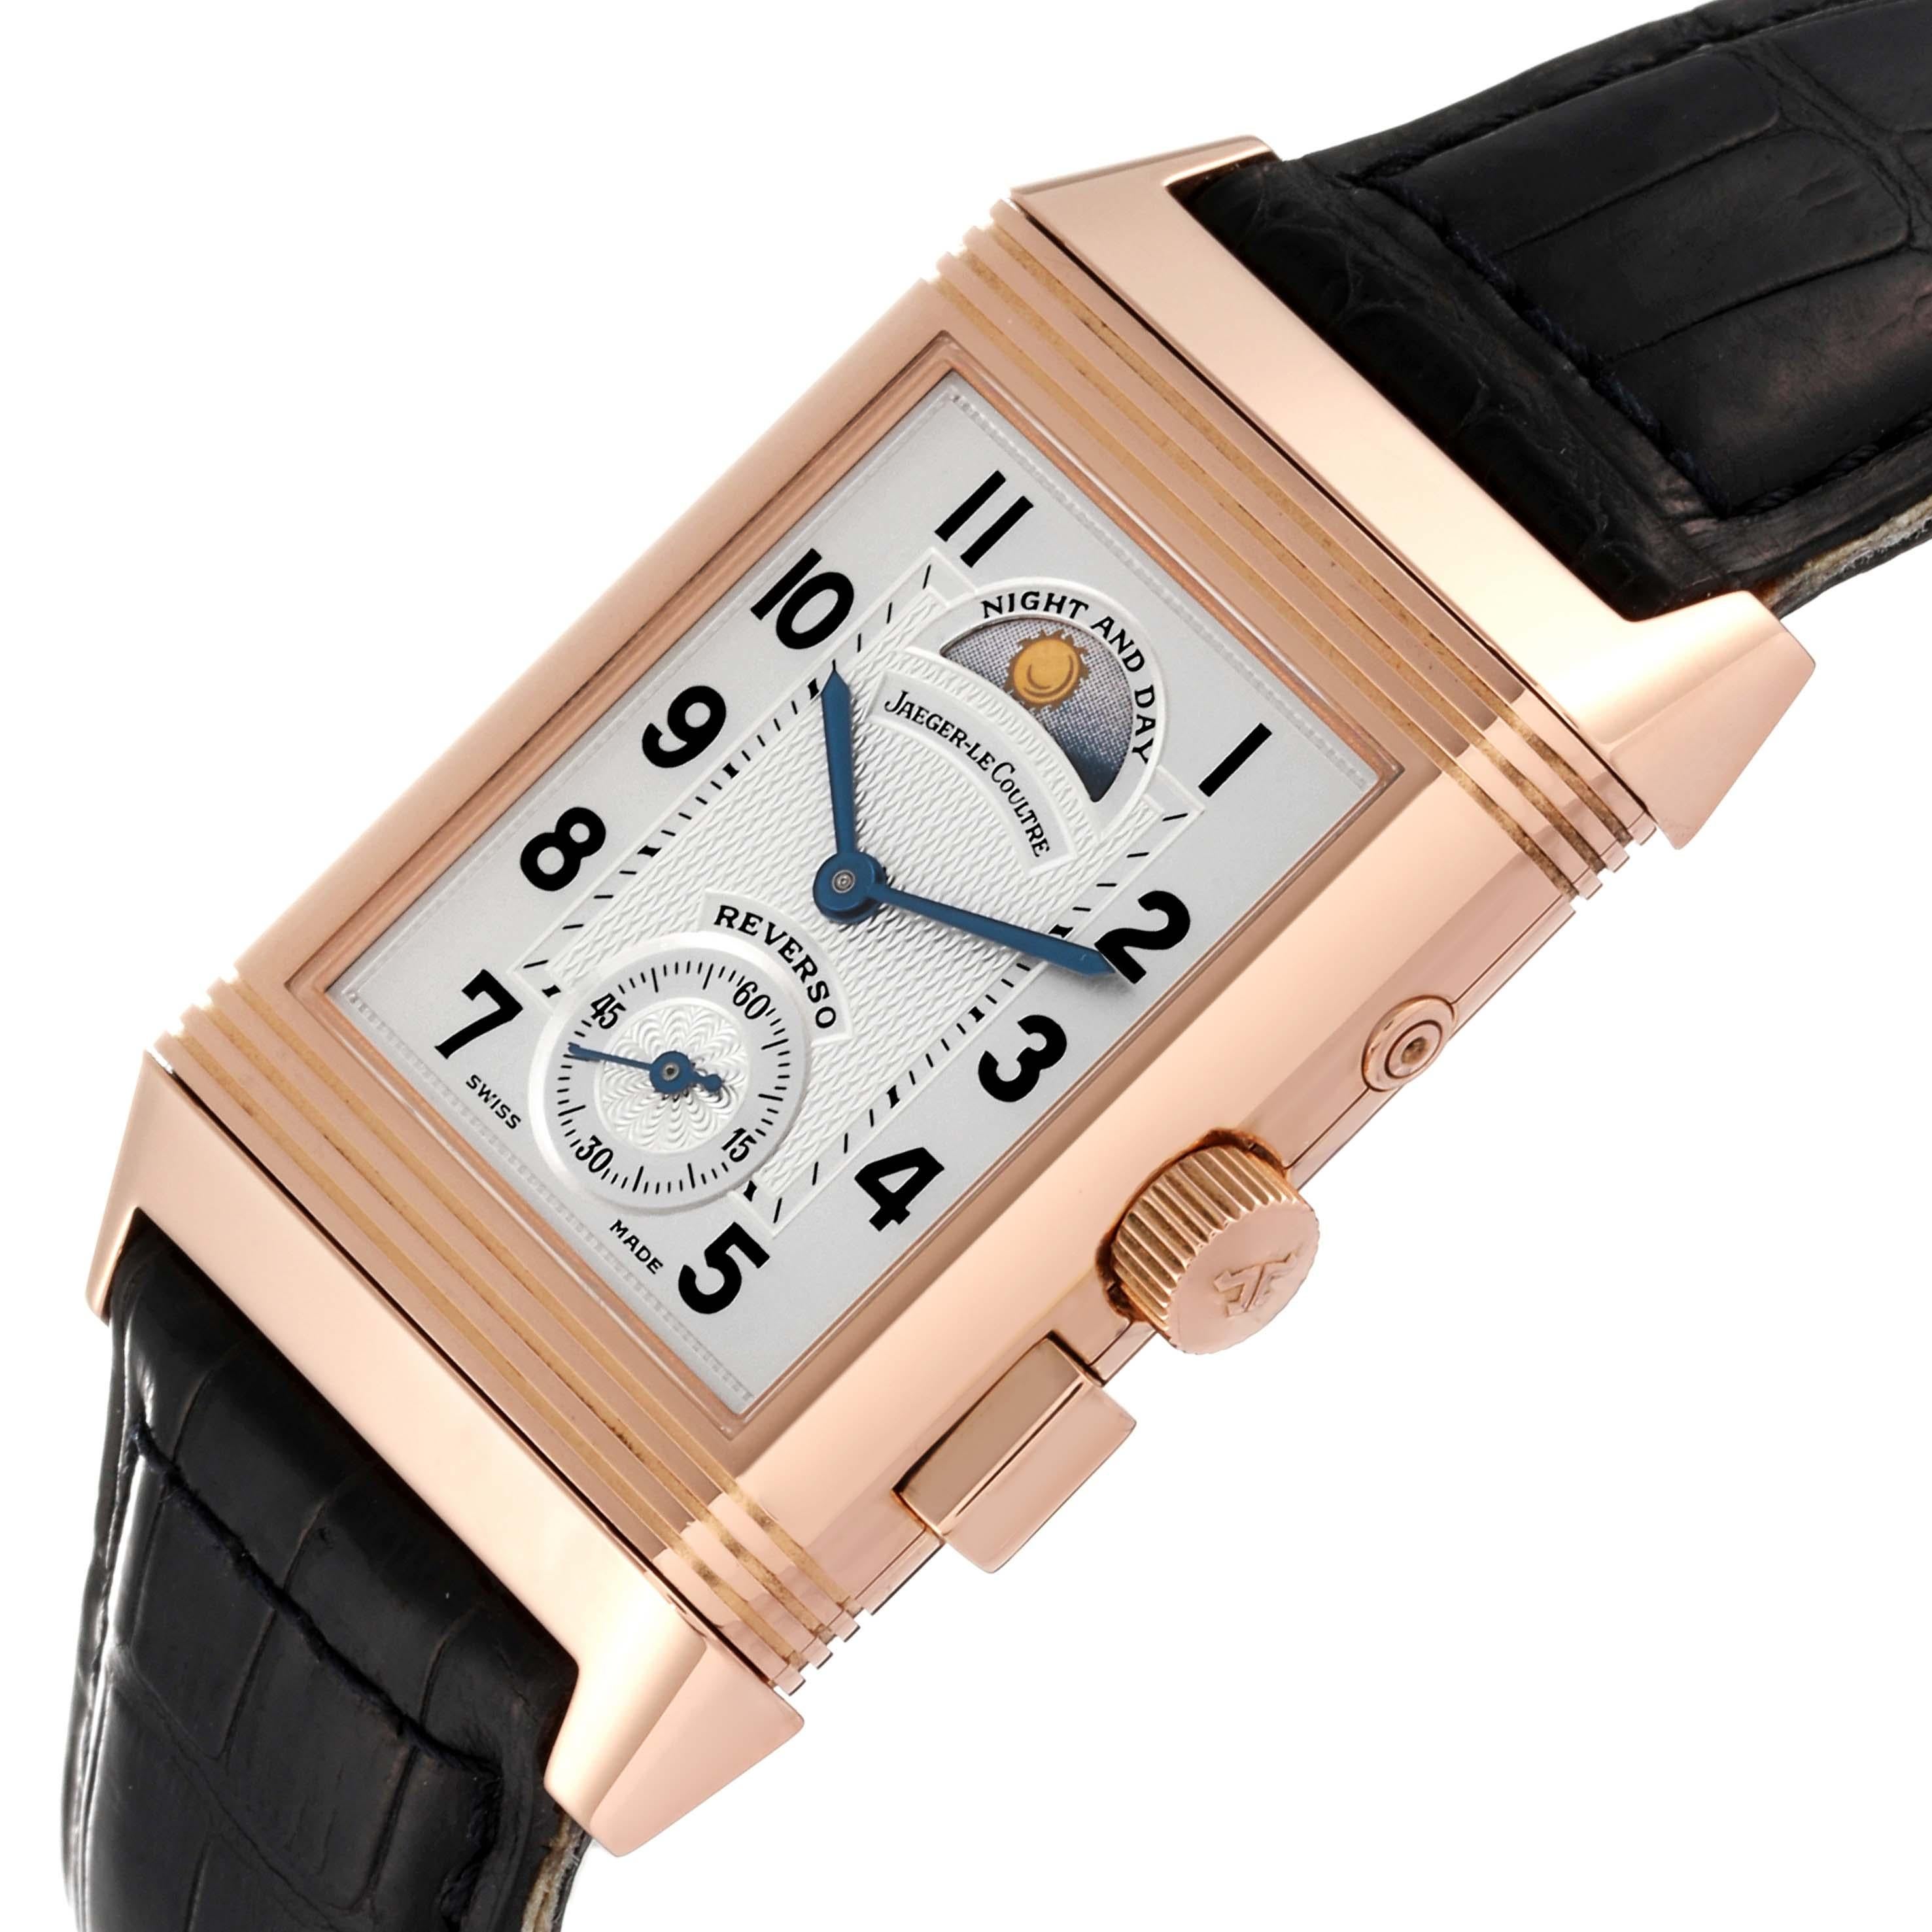 Jaeger LeCoultre Reverso Geographique LE Rose Gold Watch 270.2.582B Box Papers 3